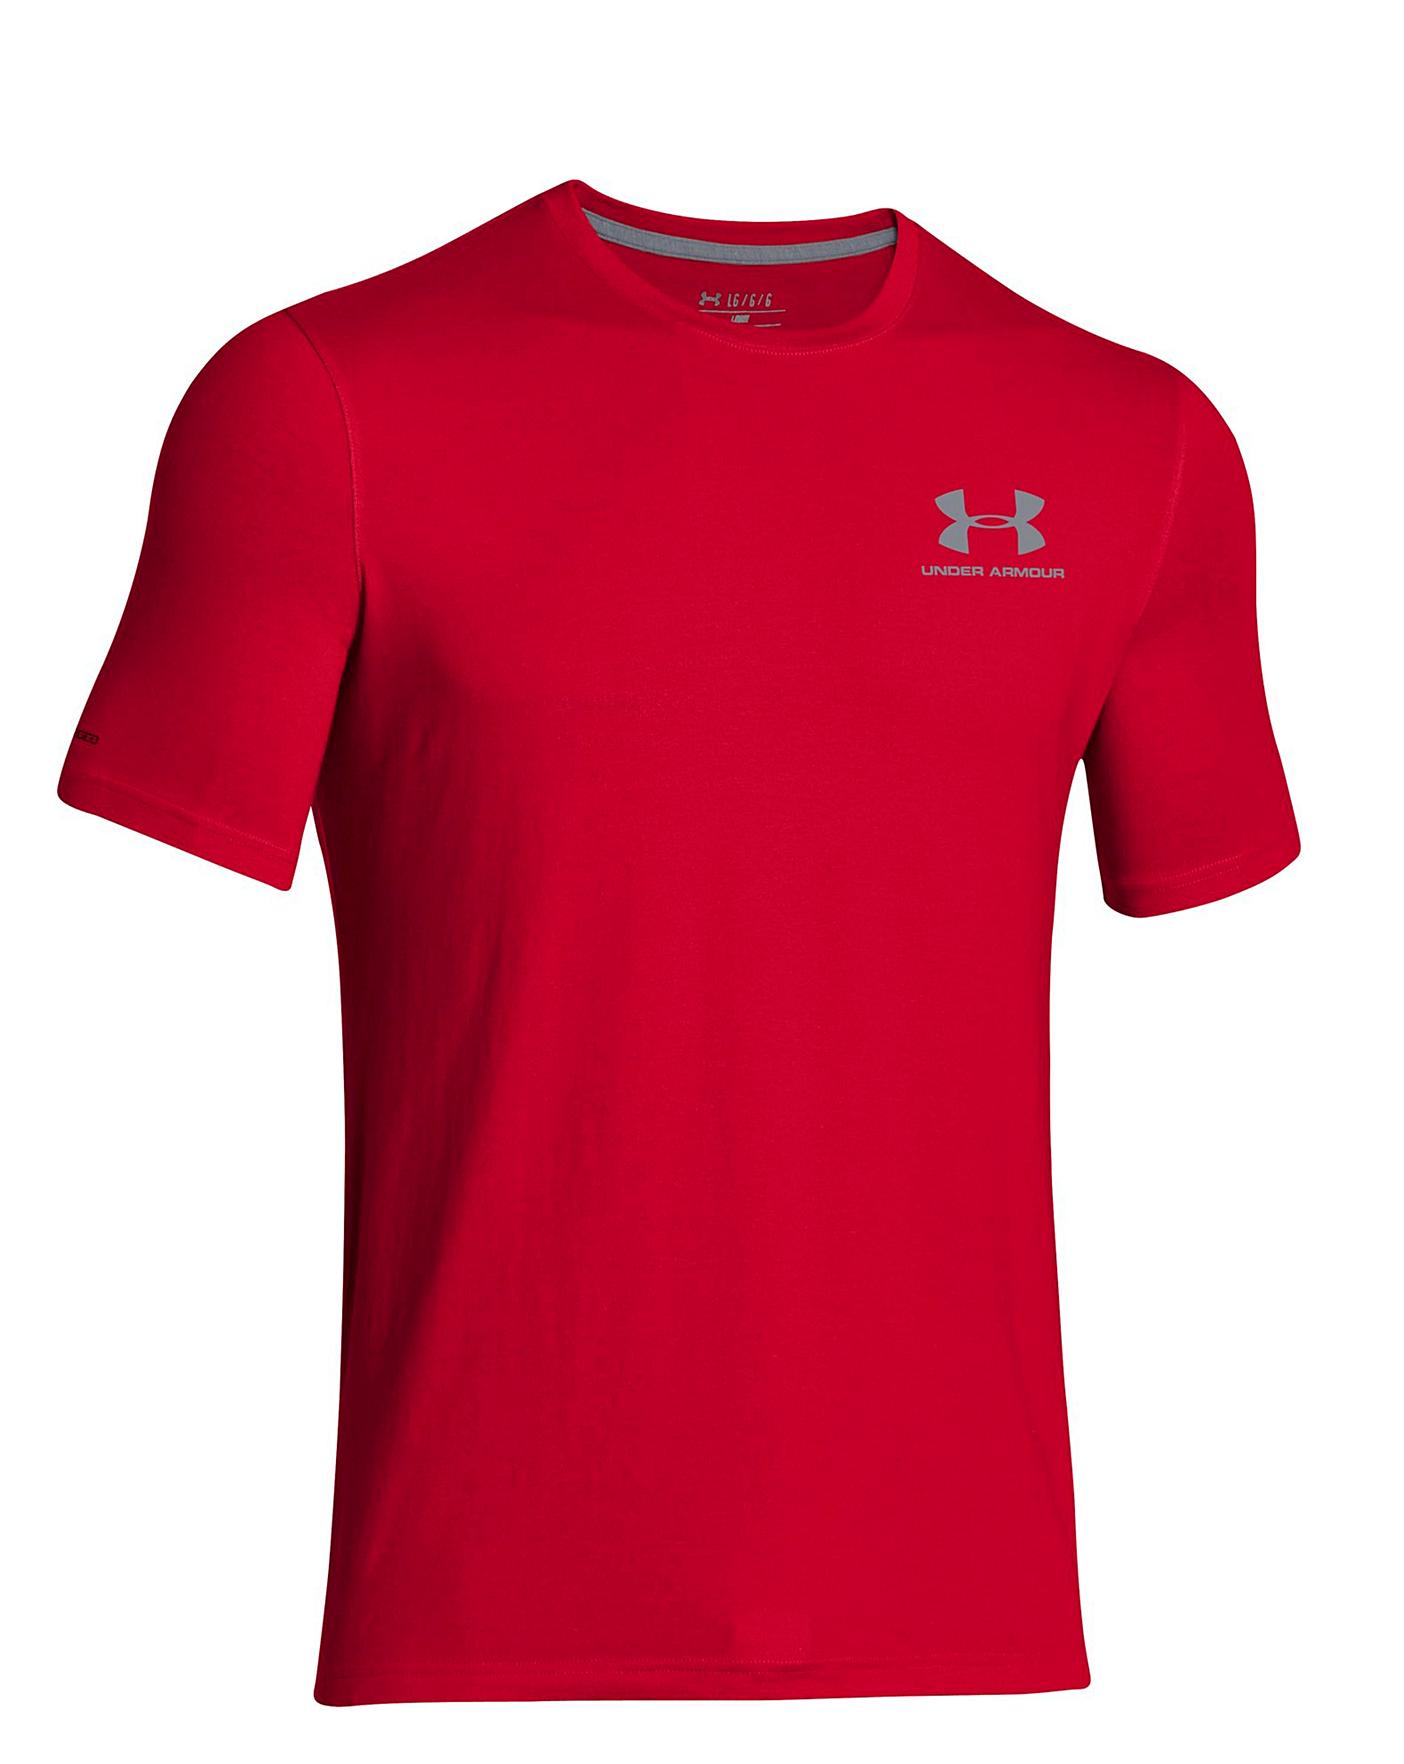 Under Armour Men's UA Charged Cotton Sportstyle T-Shirt 1257616-410  Midnight Navy